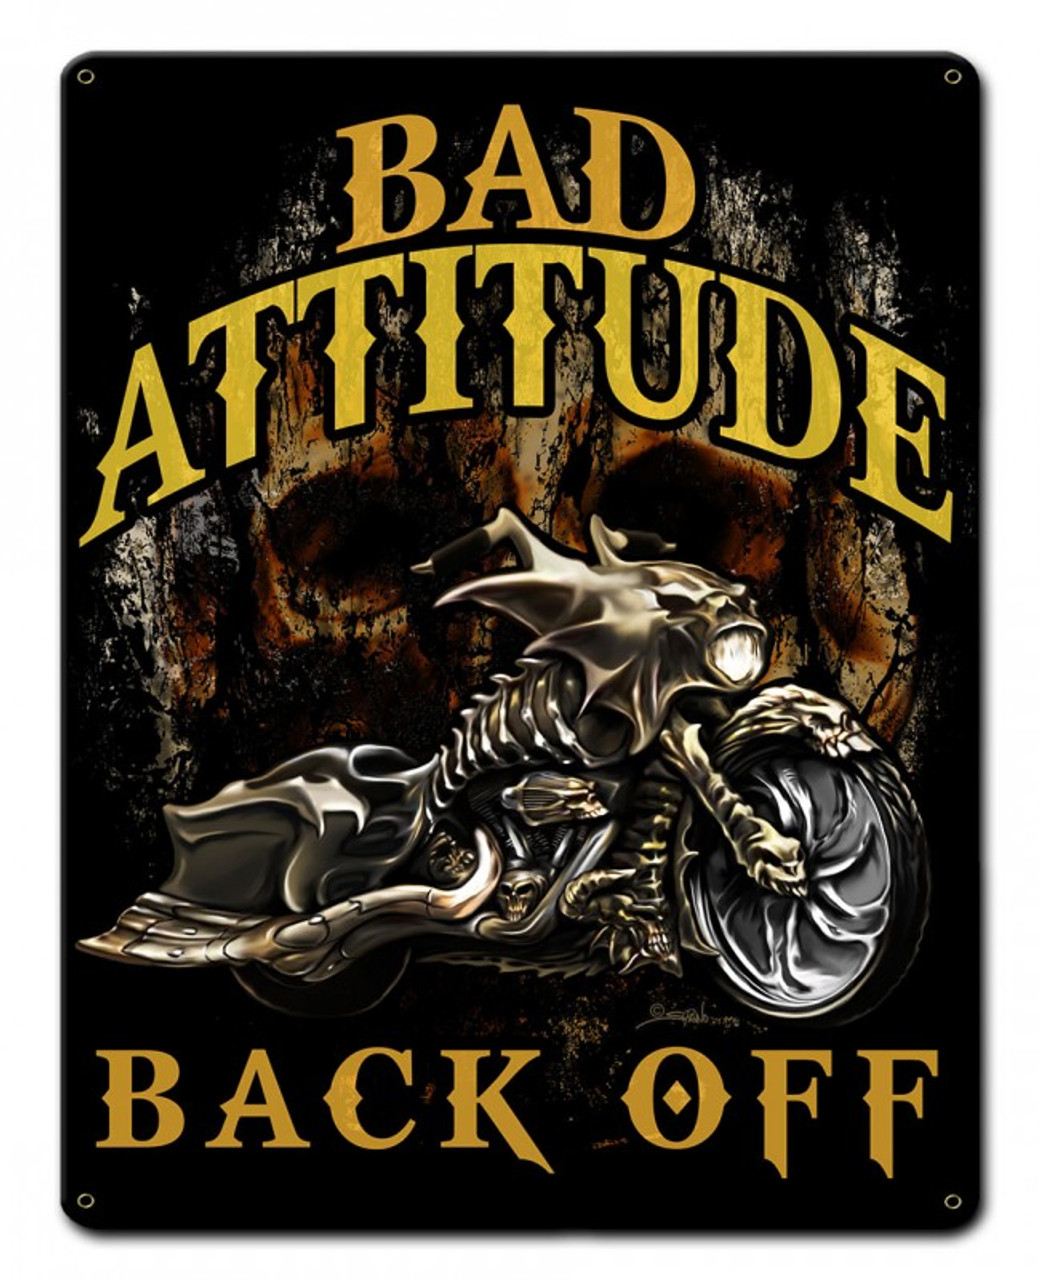 Bad Attitude Bad Ass Bagger Metal Sign 15 x 12 Inches